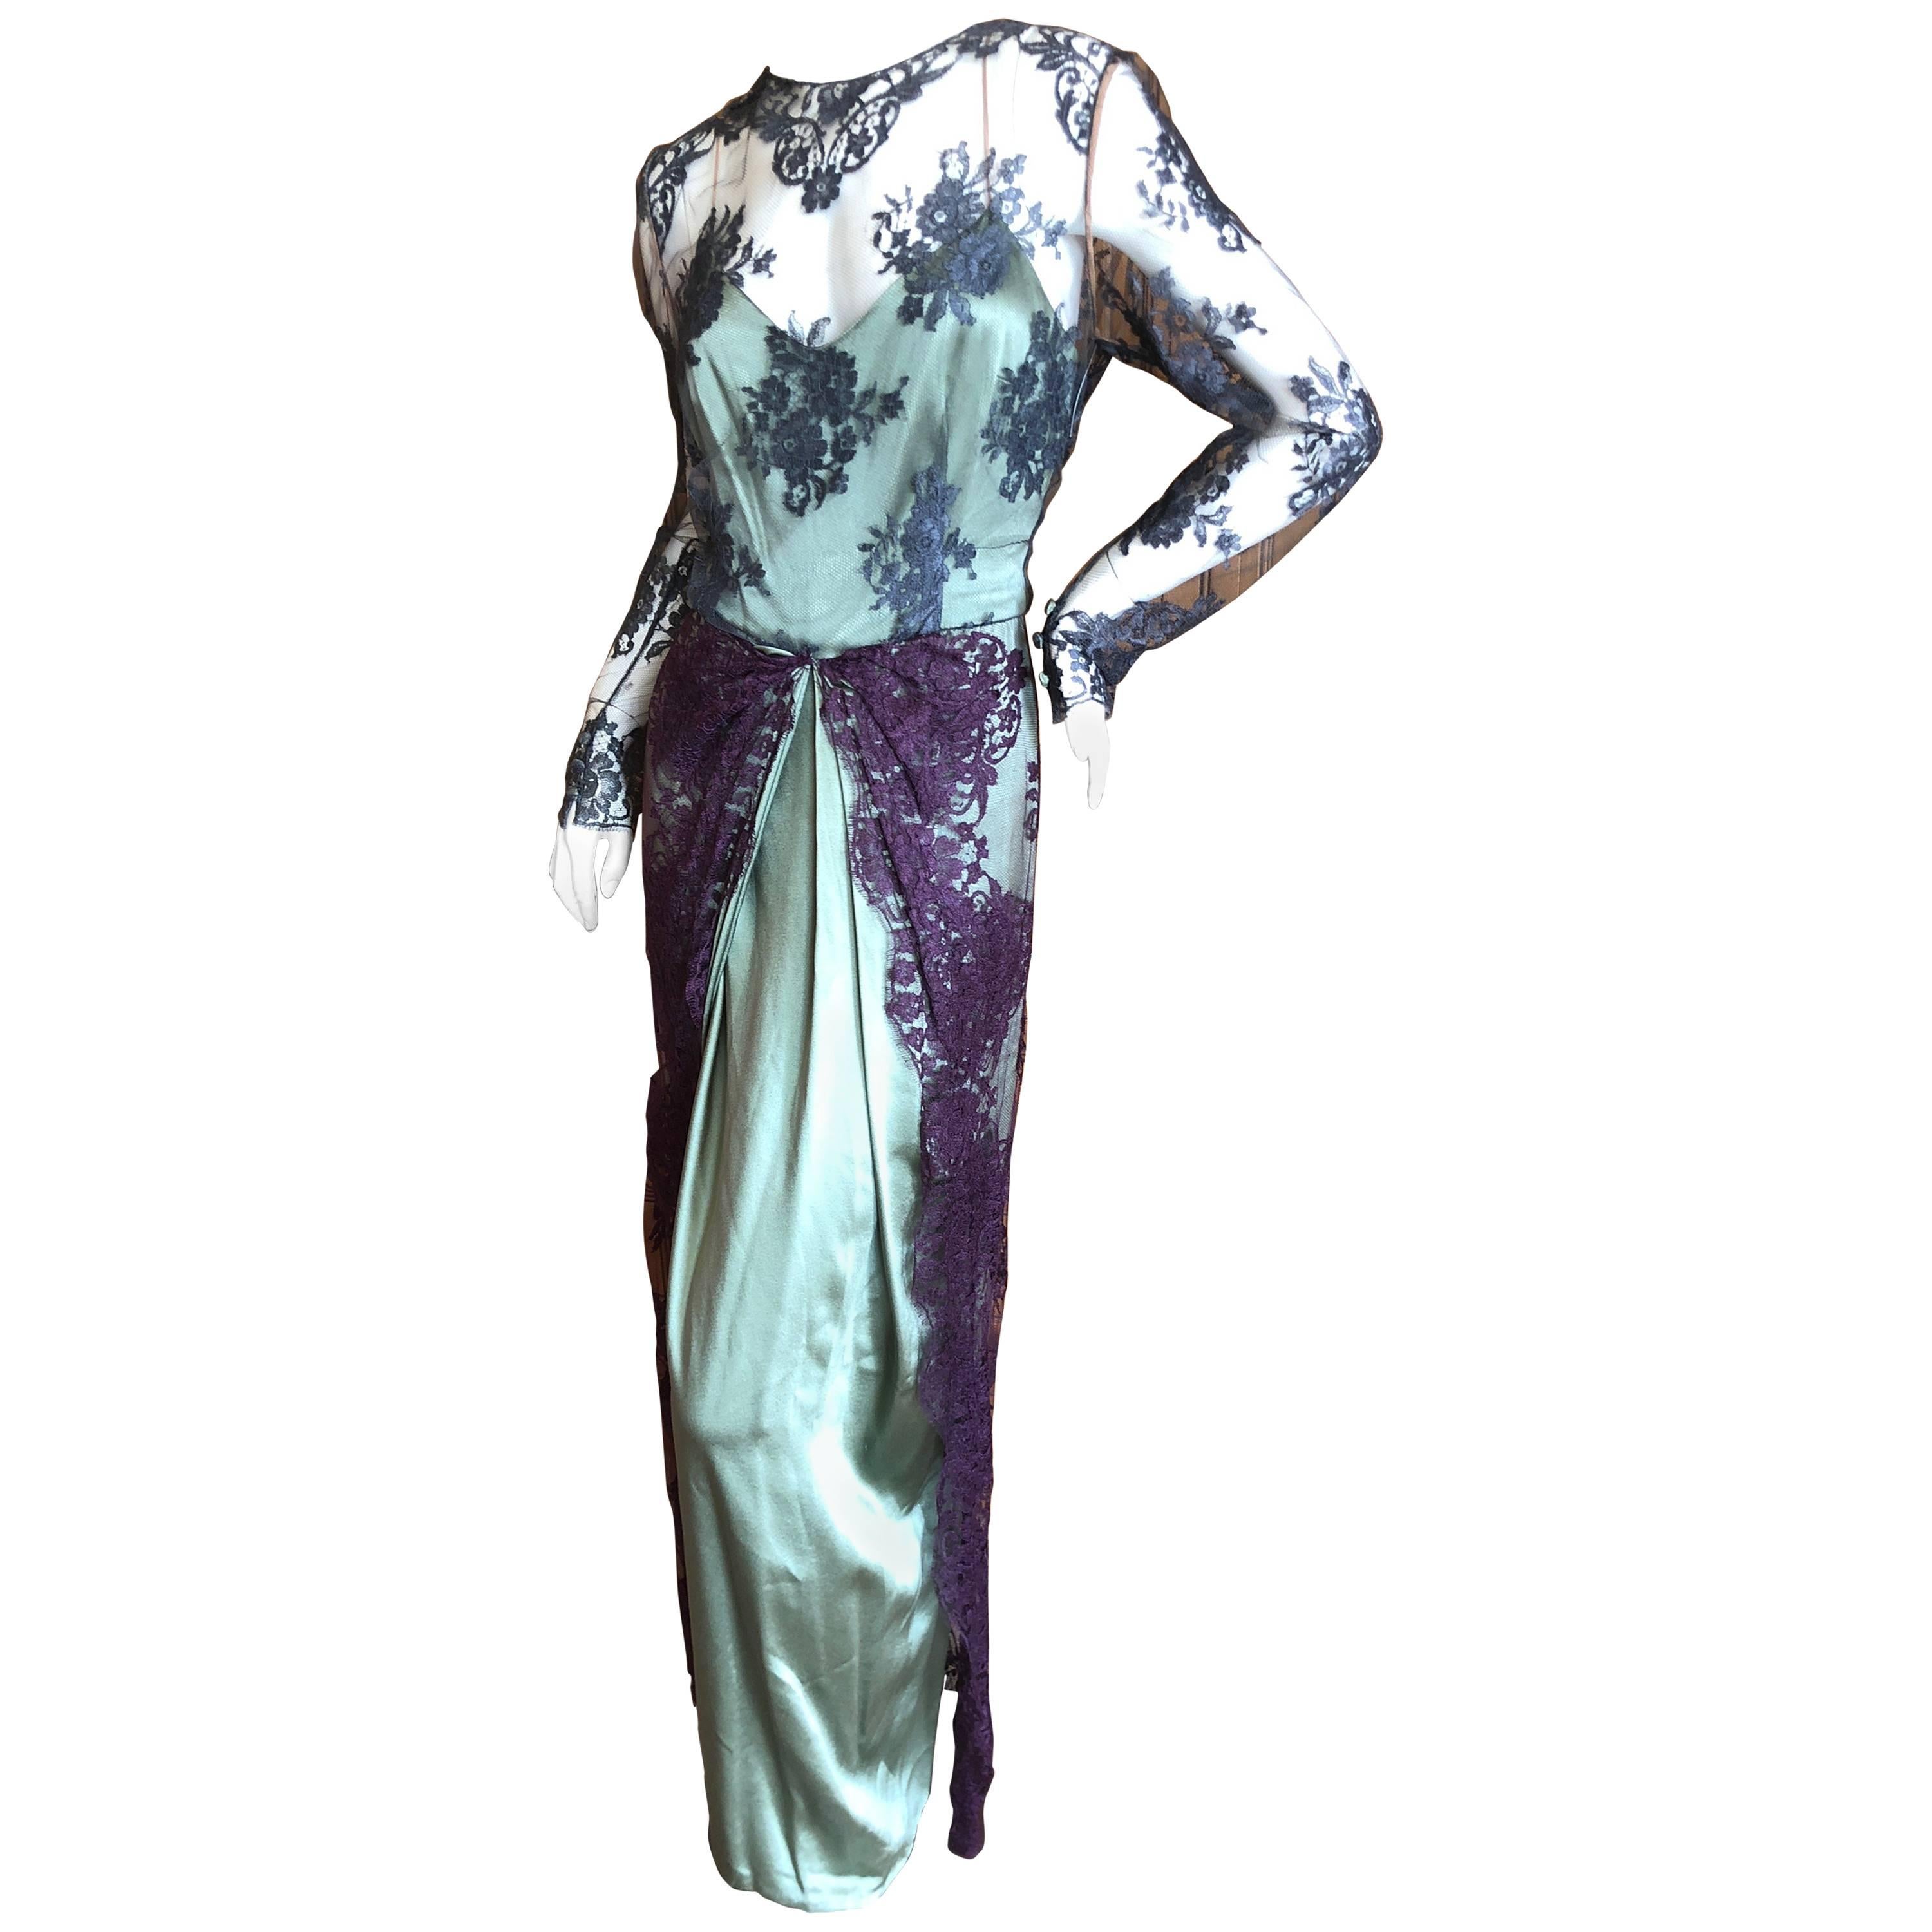 Bill Blass Vintage 1970's Silk Evening Dress with Lace Overlay Details For Sale